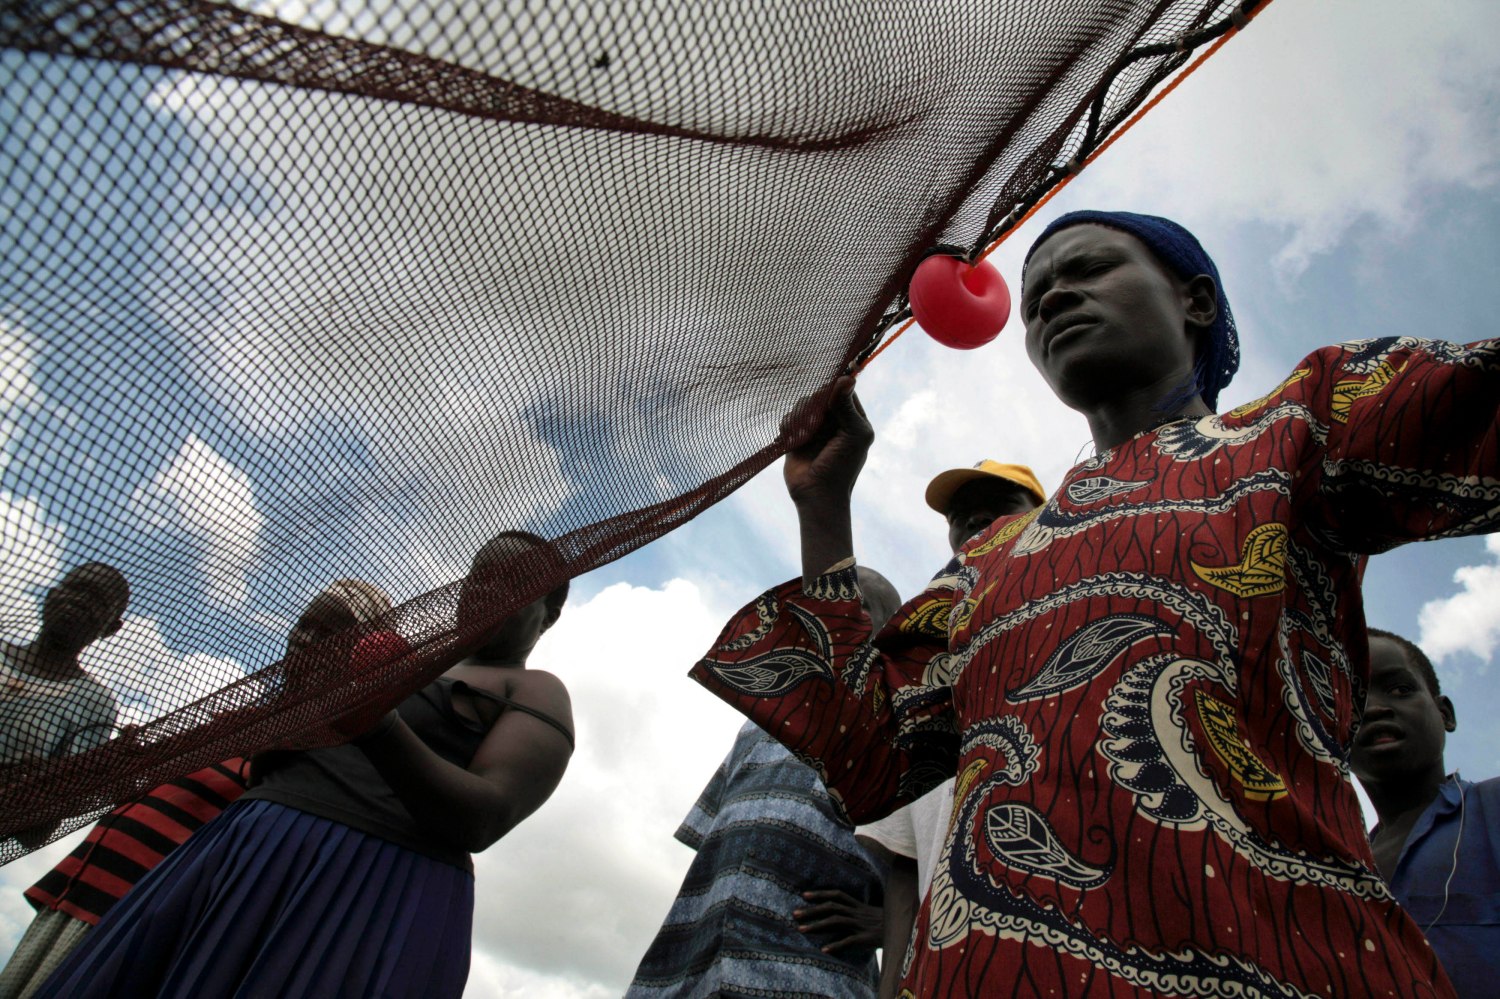 Women prepare to cast a net at a community fish farm project east of Lira in northern Uganda July 28, 2007. The Samaritan's Purse/WFP started the project after some 450,000 ethnic Langi displaced into camps by the Lord's Resistance Army returned home in the last 18 months, according to UNHCR. REUTERS/Euan Denholm (UGANDA)